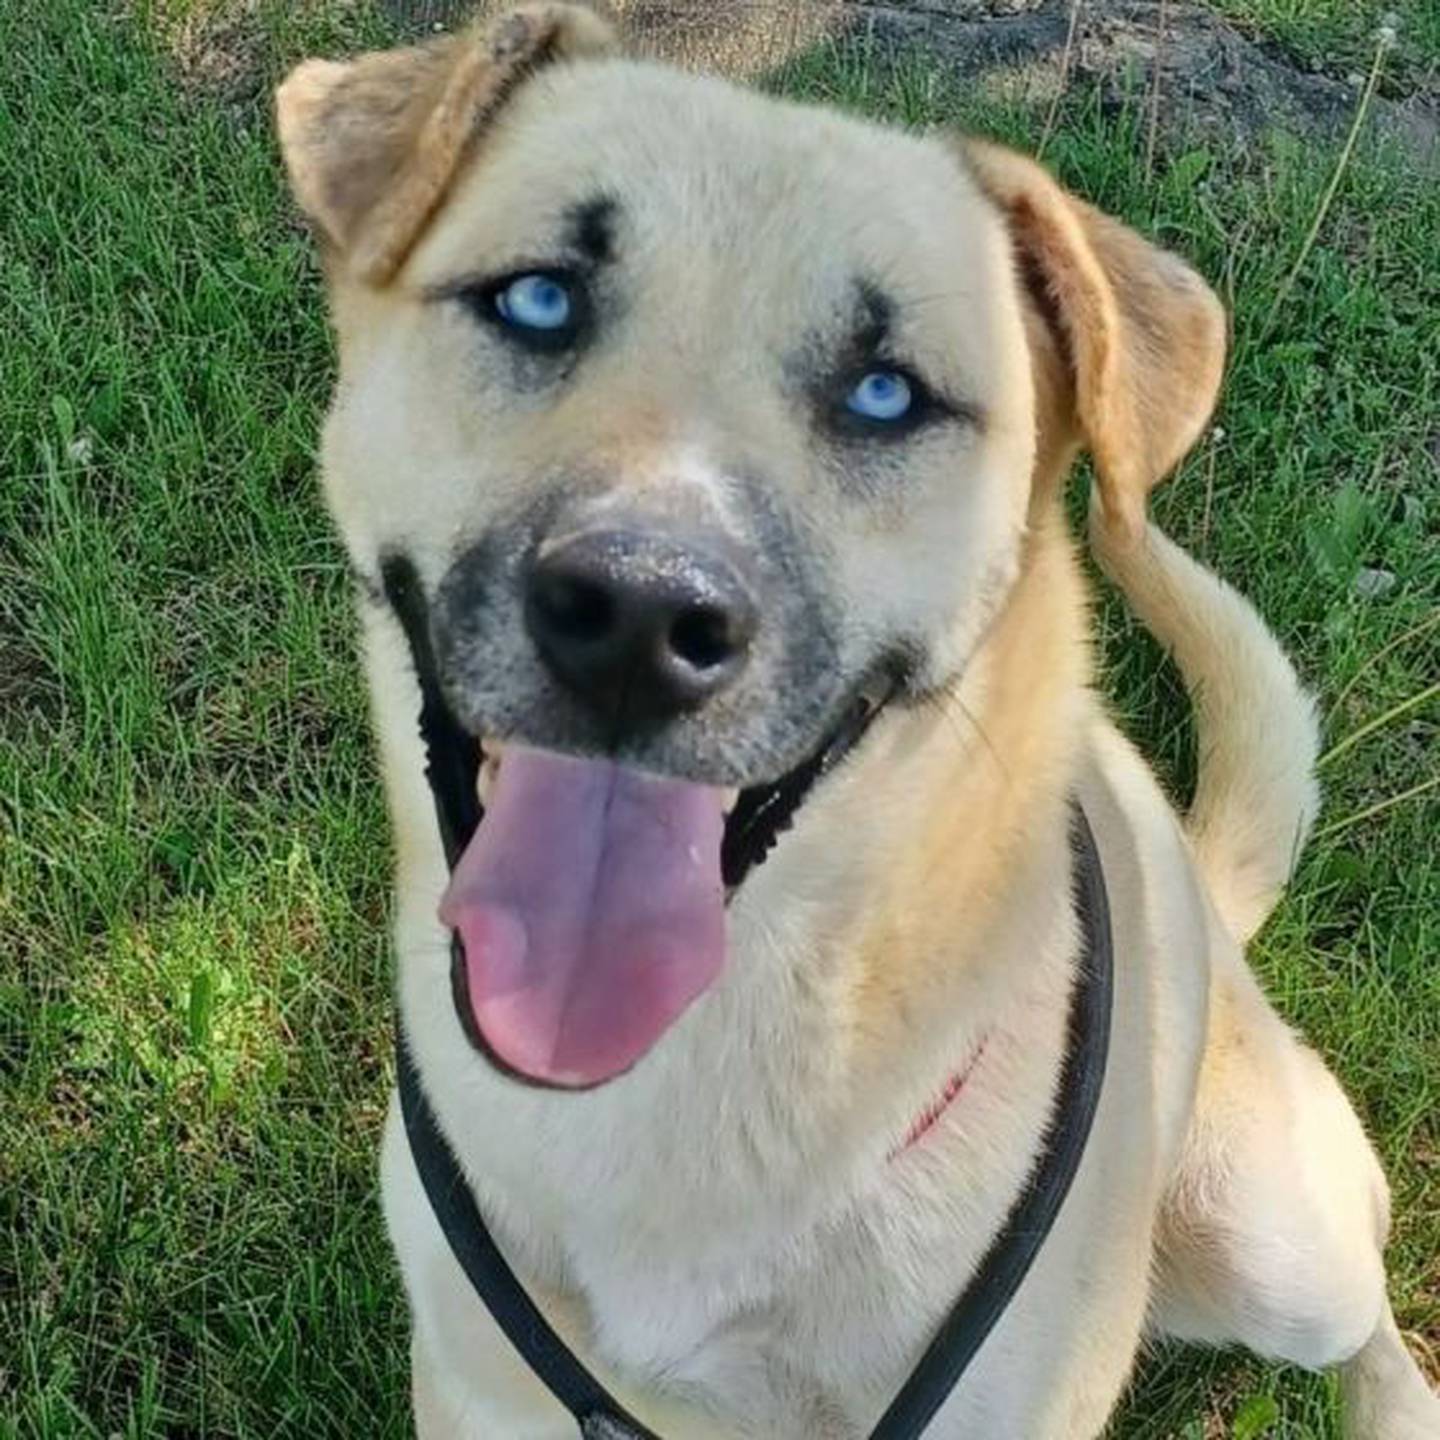 Lance is a 1-year-old shepherd mix who loves people. Lance weighs less than 50 pounds and loves to cuddle. He will snuggle all day if you let him. To meet Lance, contact Hopeful Tails Animal Rescue at hopefultailsadoptions@outlook.com. Visit hopefultailsanimalrescue.org.